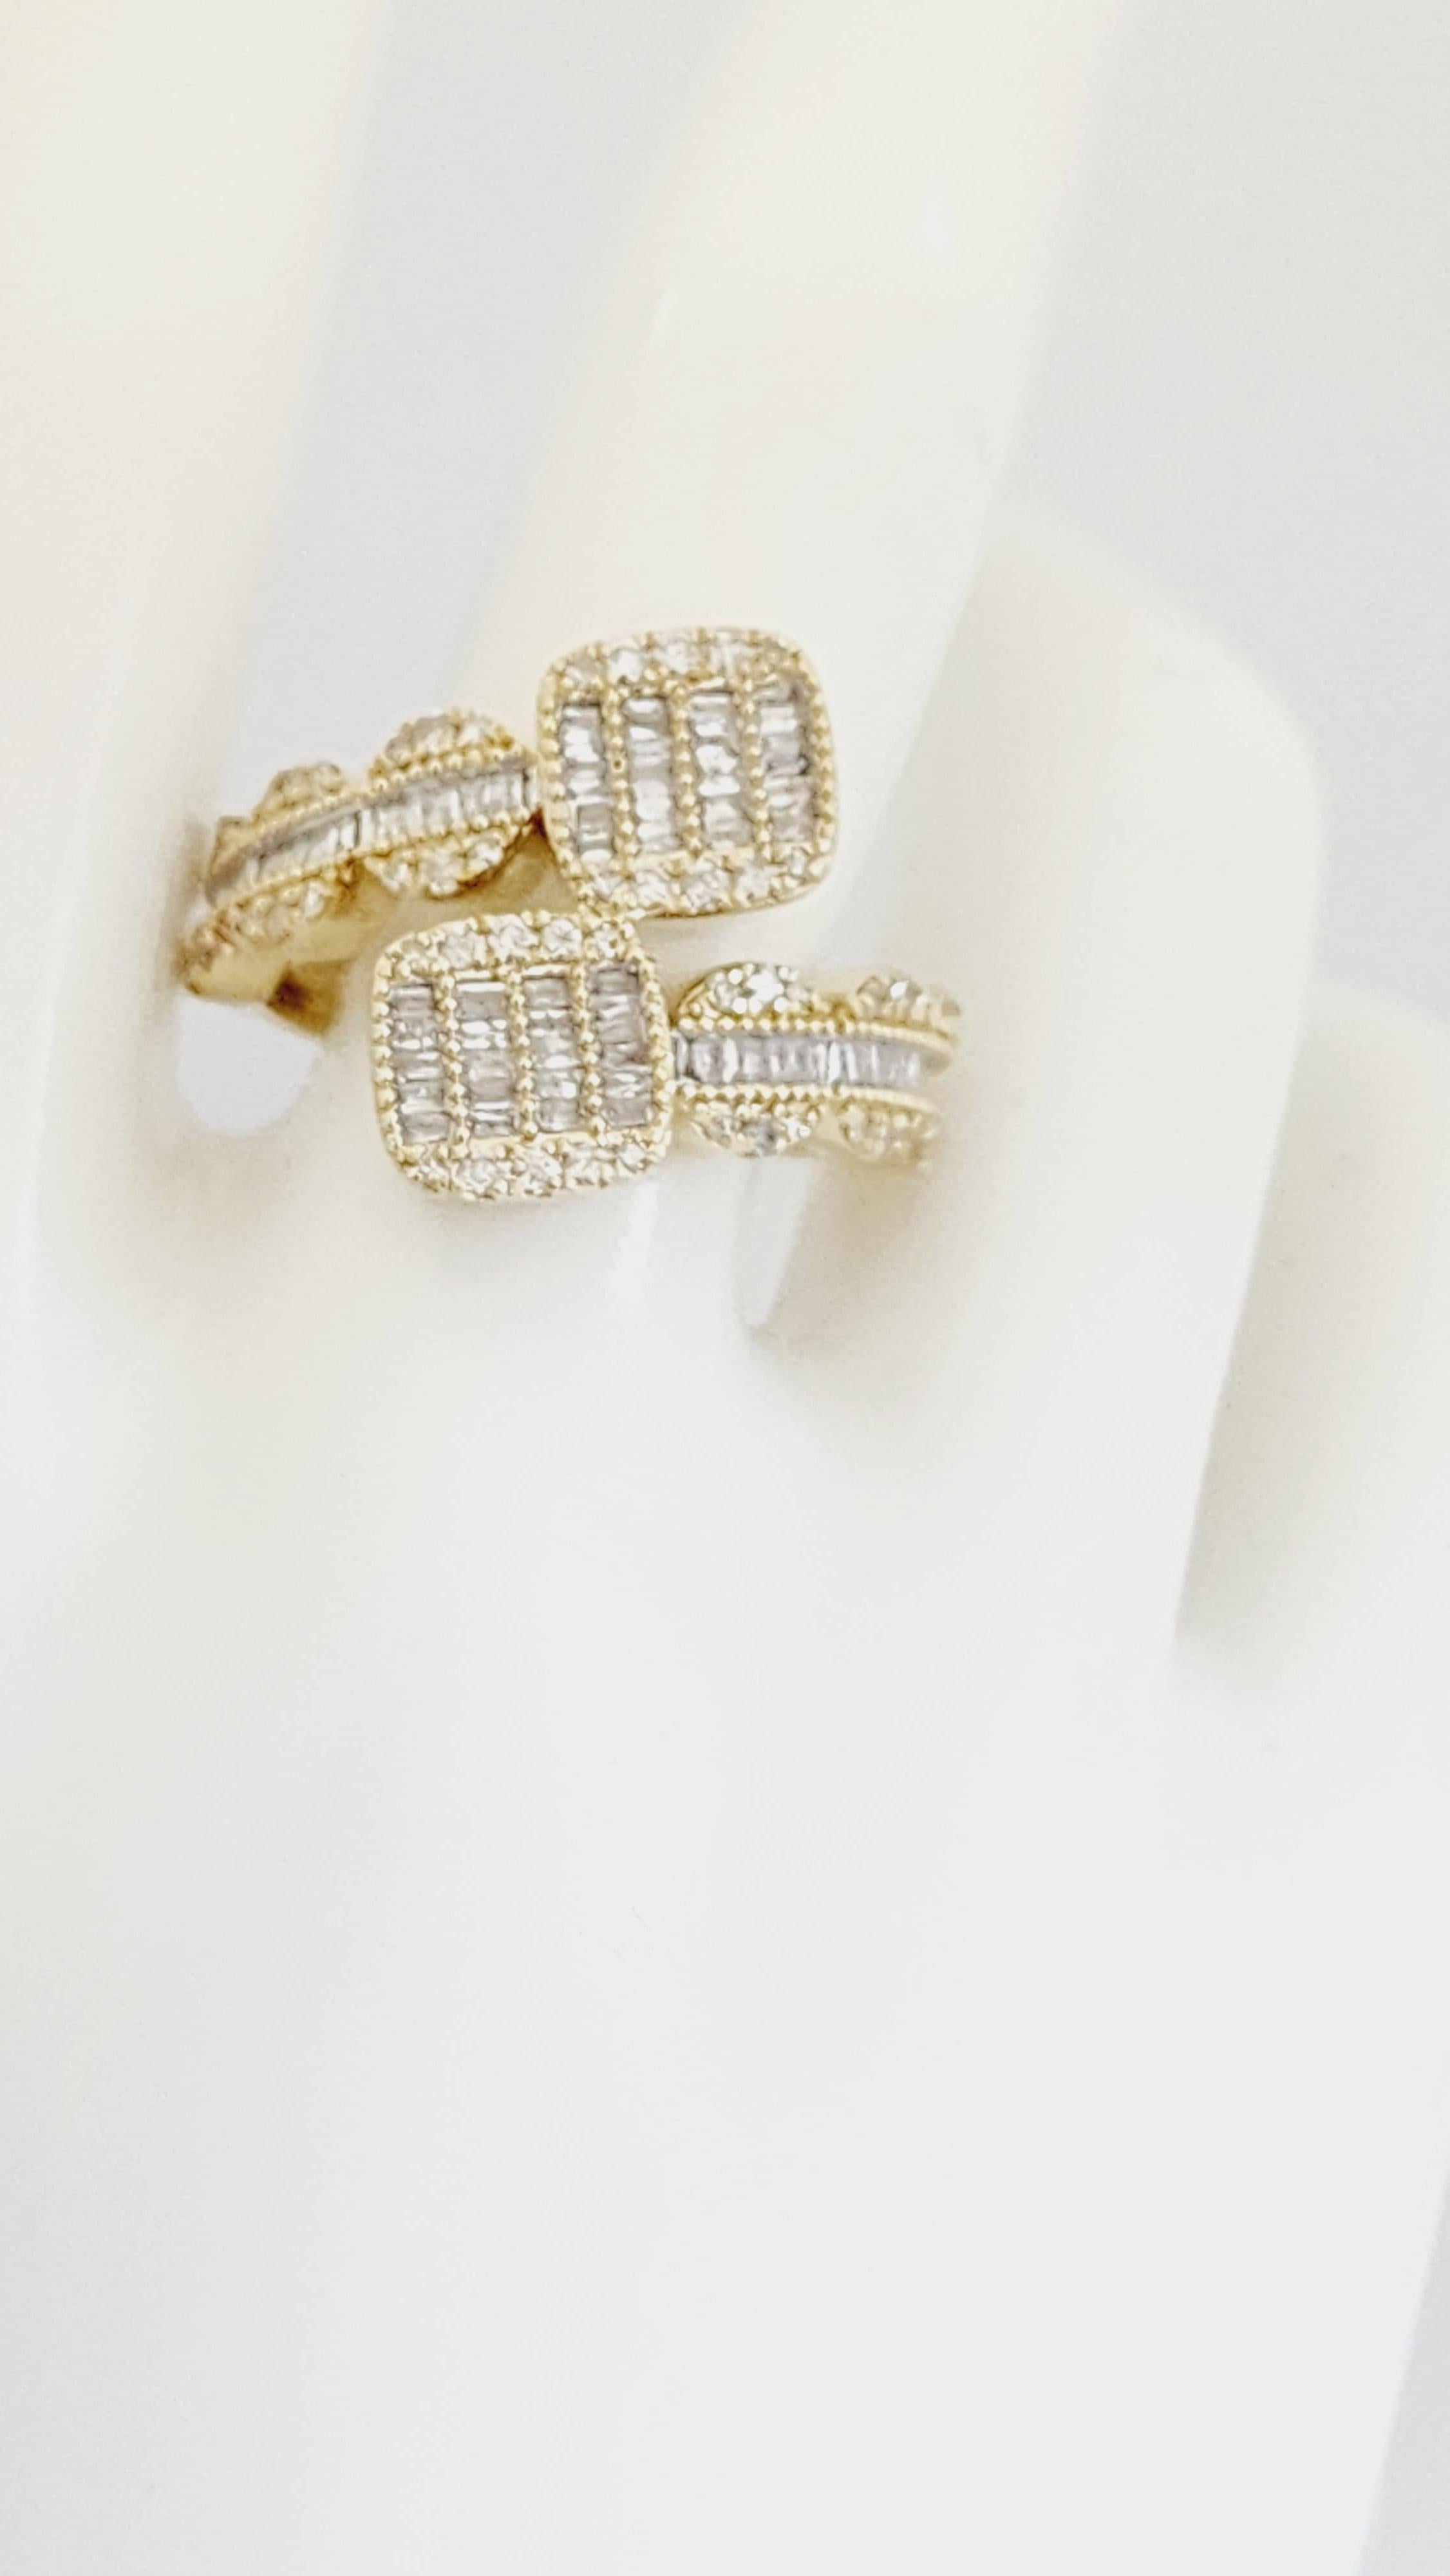 0.95 Carat Natural Diamond 14 Karat Yellow Gold Ring 
Very Shiny & Clean, Average Color I Clarity I. 
Natural baguettes and round diamonds, 
Ring Size 10